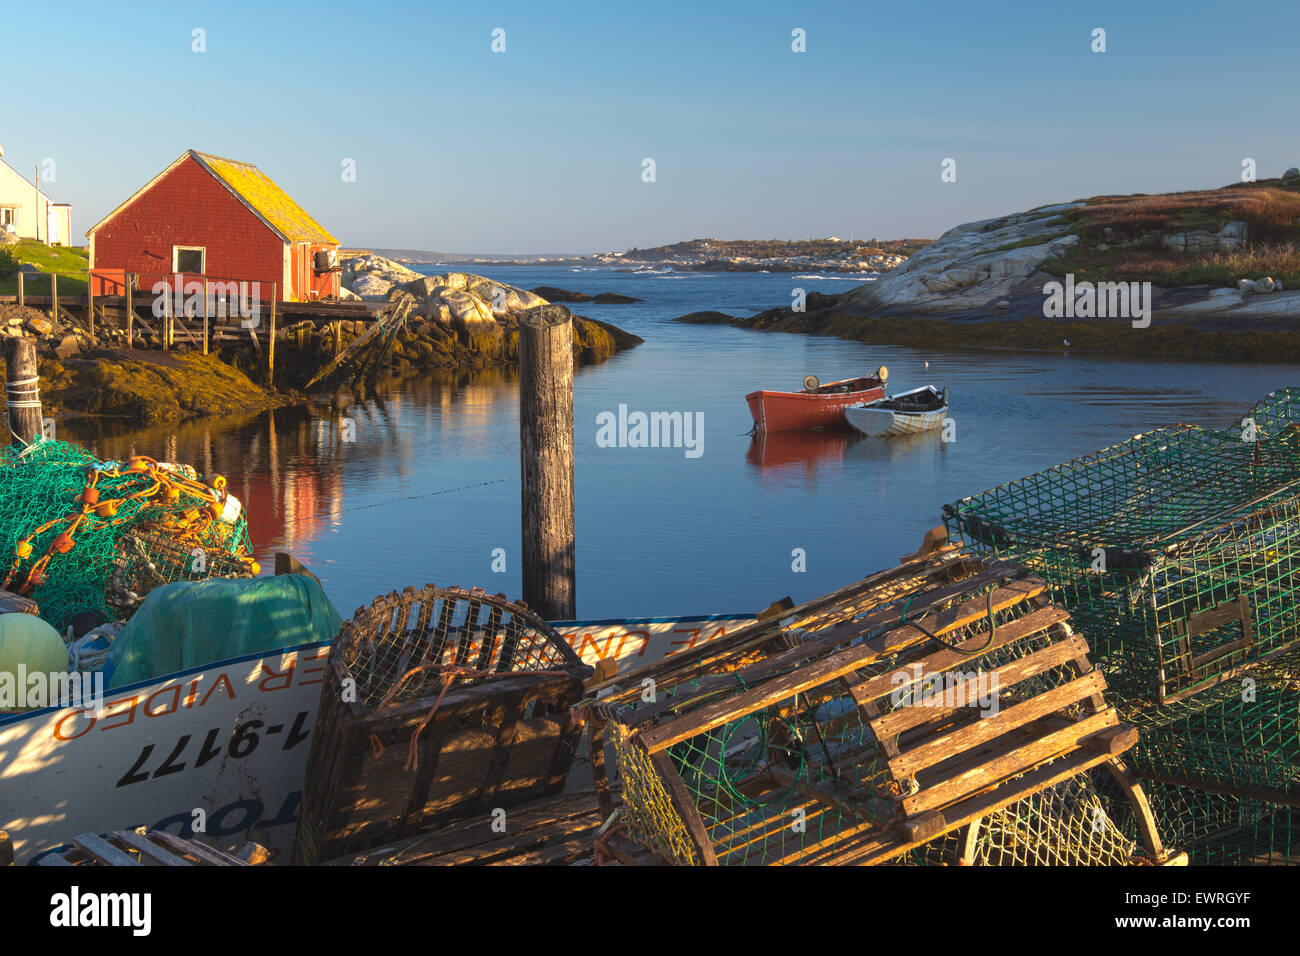 Nova Scotia Peggy's Cove, Canada fishing village with lobster boats and lobster pots. Blue sky and colorful buildings. Stock Photo